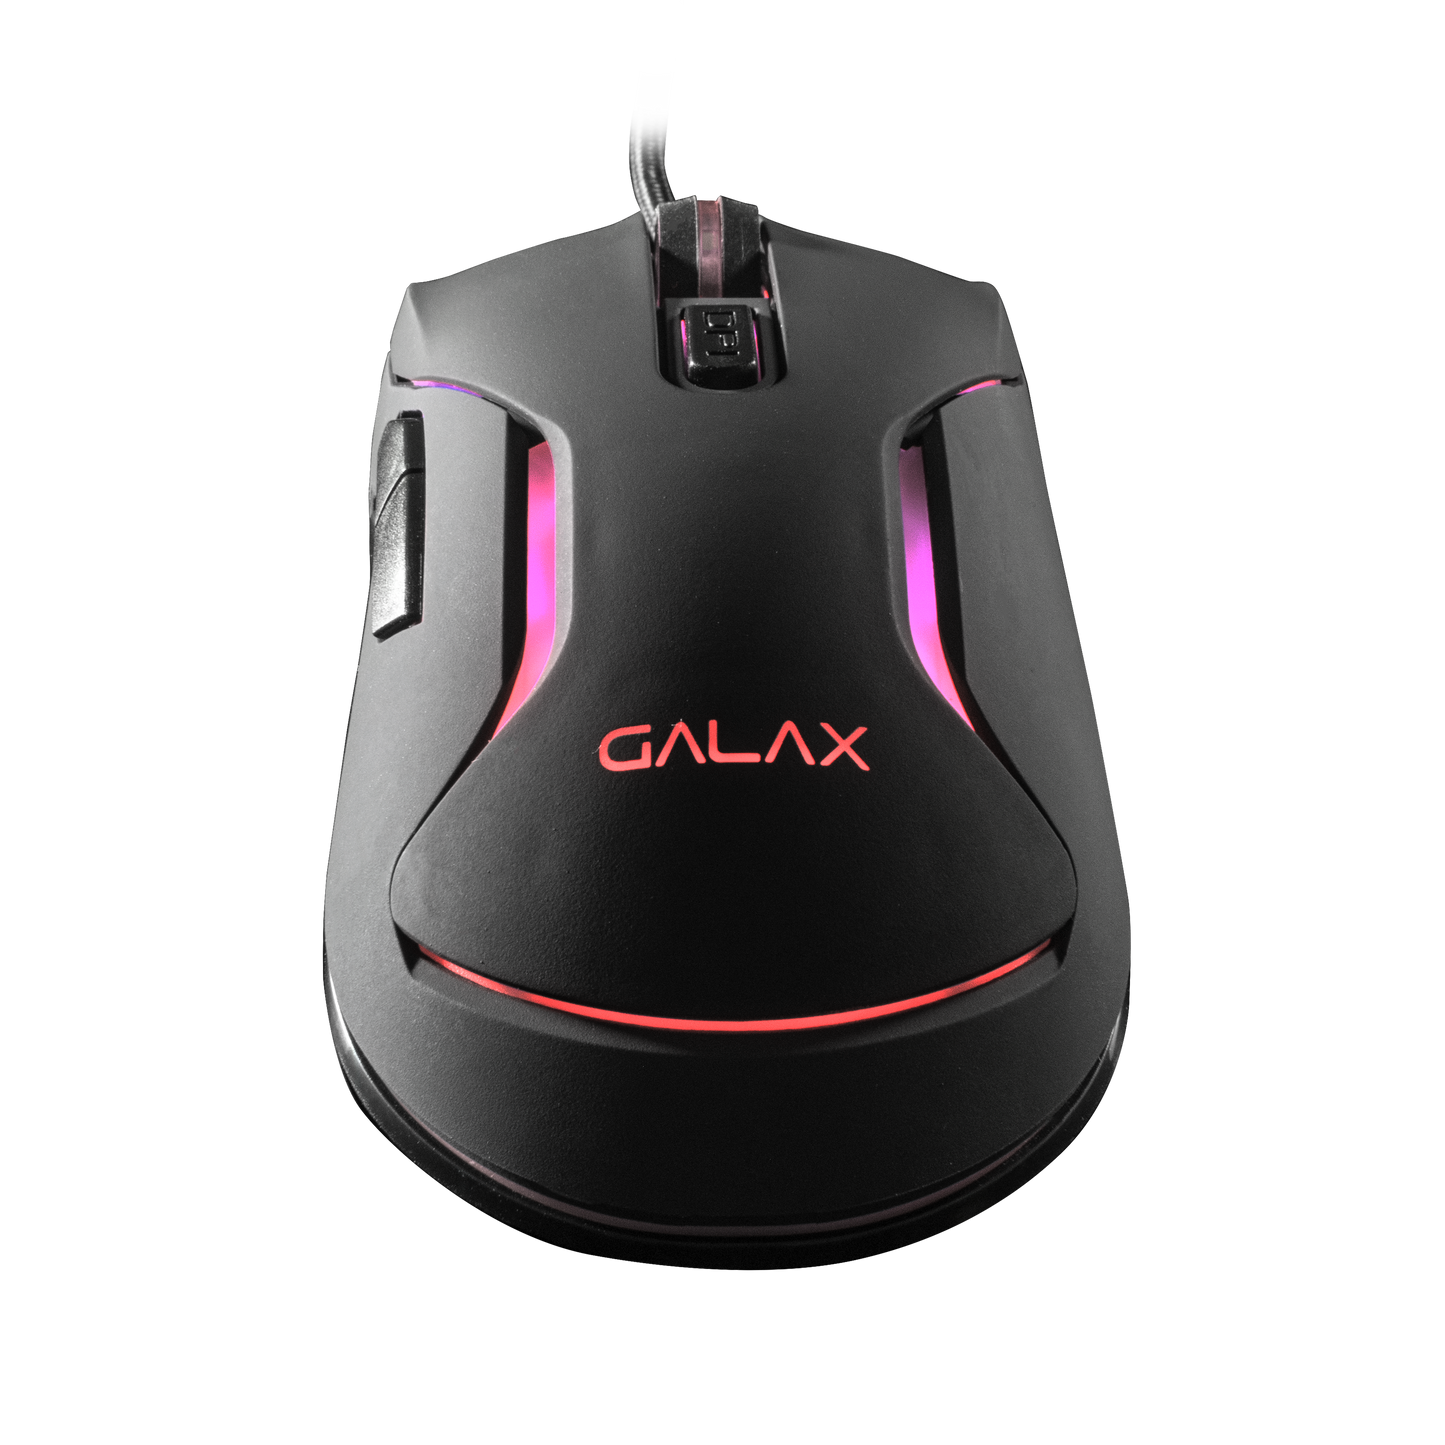 Galax USB Slider 04 6400DPI/ 4 Lights/ 6 Keys Gaming Mouse (SLD-04)-MOUSE-Galax-computerspace